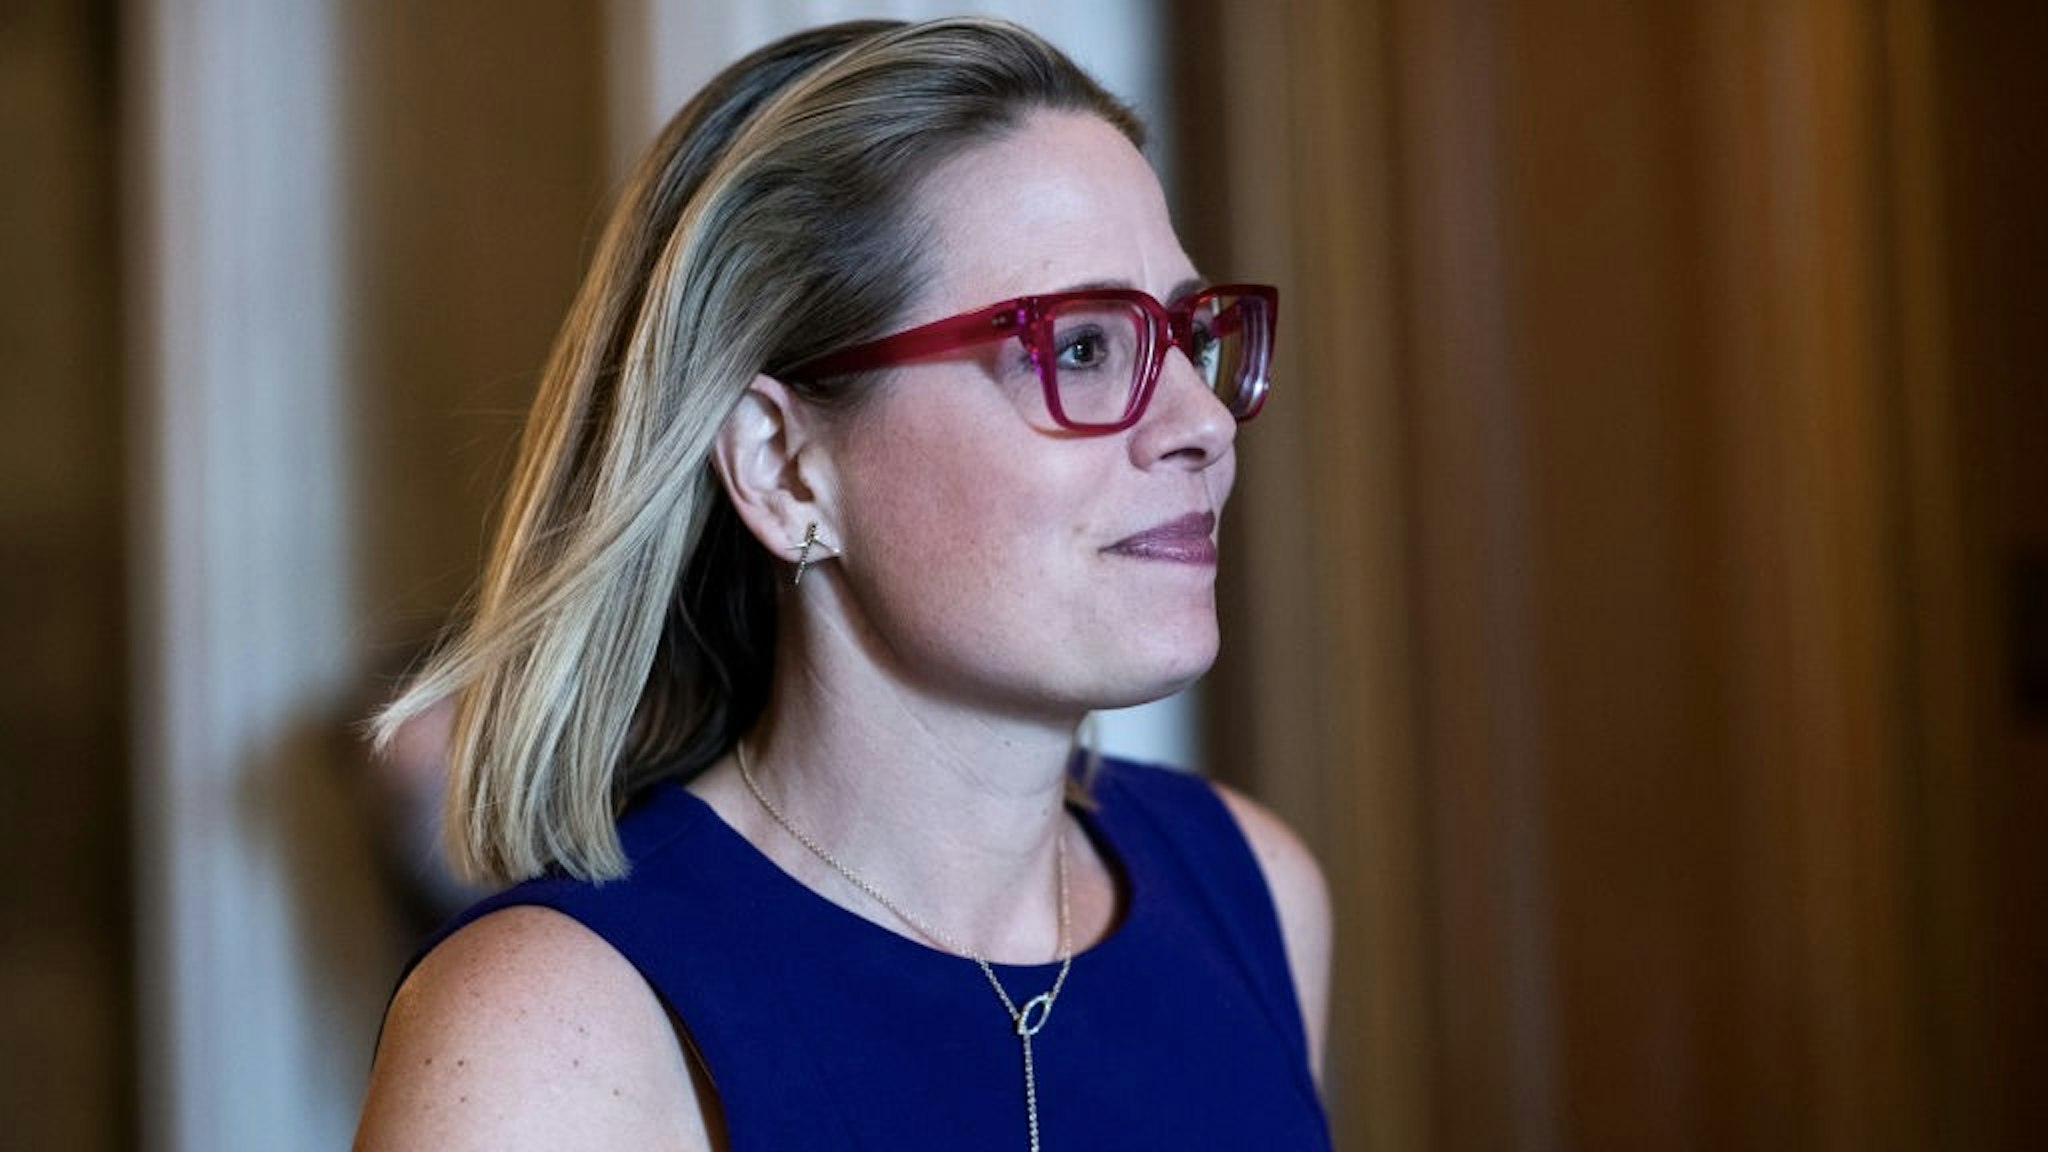 Senate Votes UNITED STATES - JUNE 10: Sen. Kyrsten Sinema, D-Ariz., is seen during a vote in the Capitol on Thursday, June 10, 2021. (Photo By Tom Williams/CQ-Roll Call, Inc via Getty Images) Tom Williams / Contributor